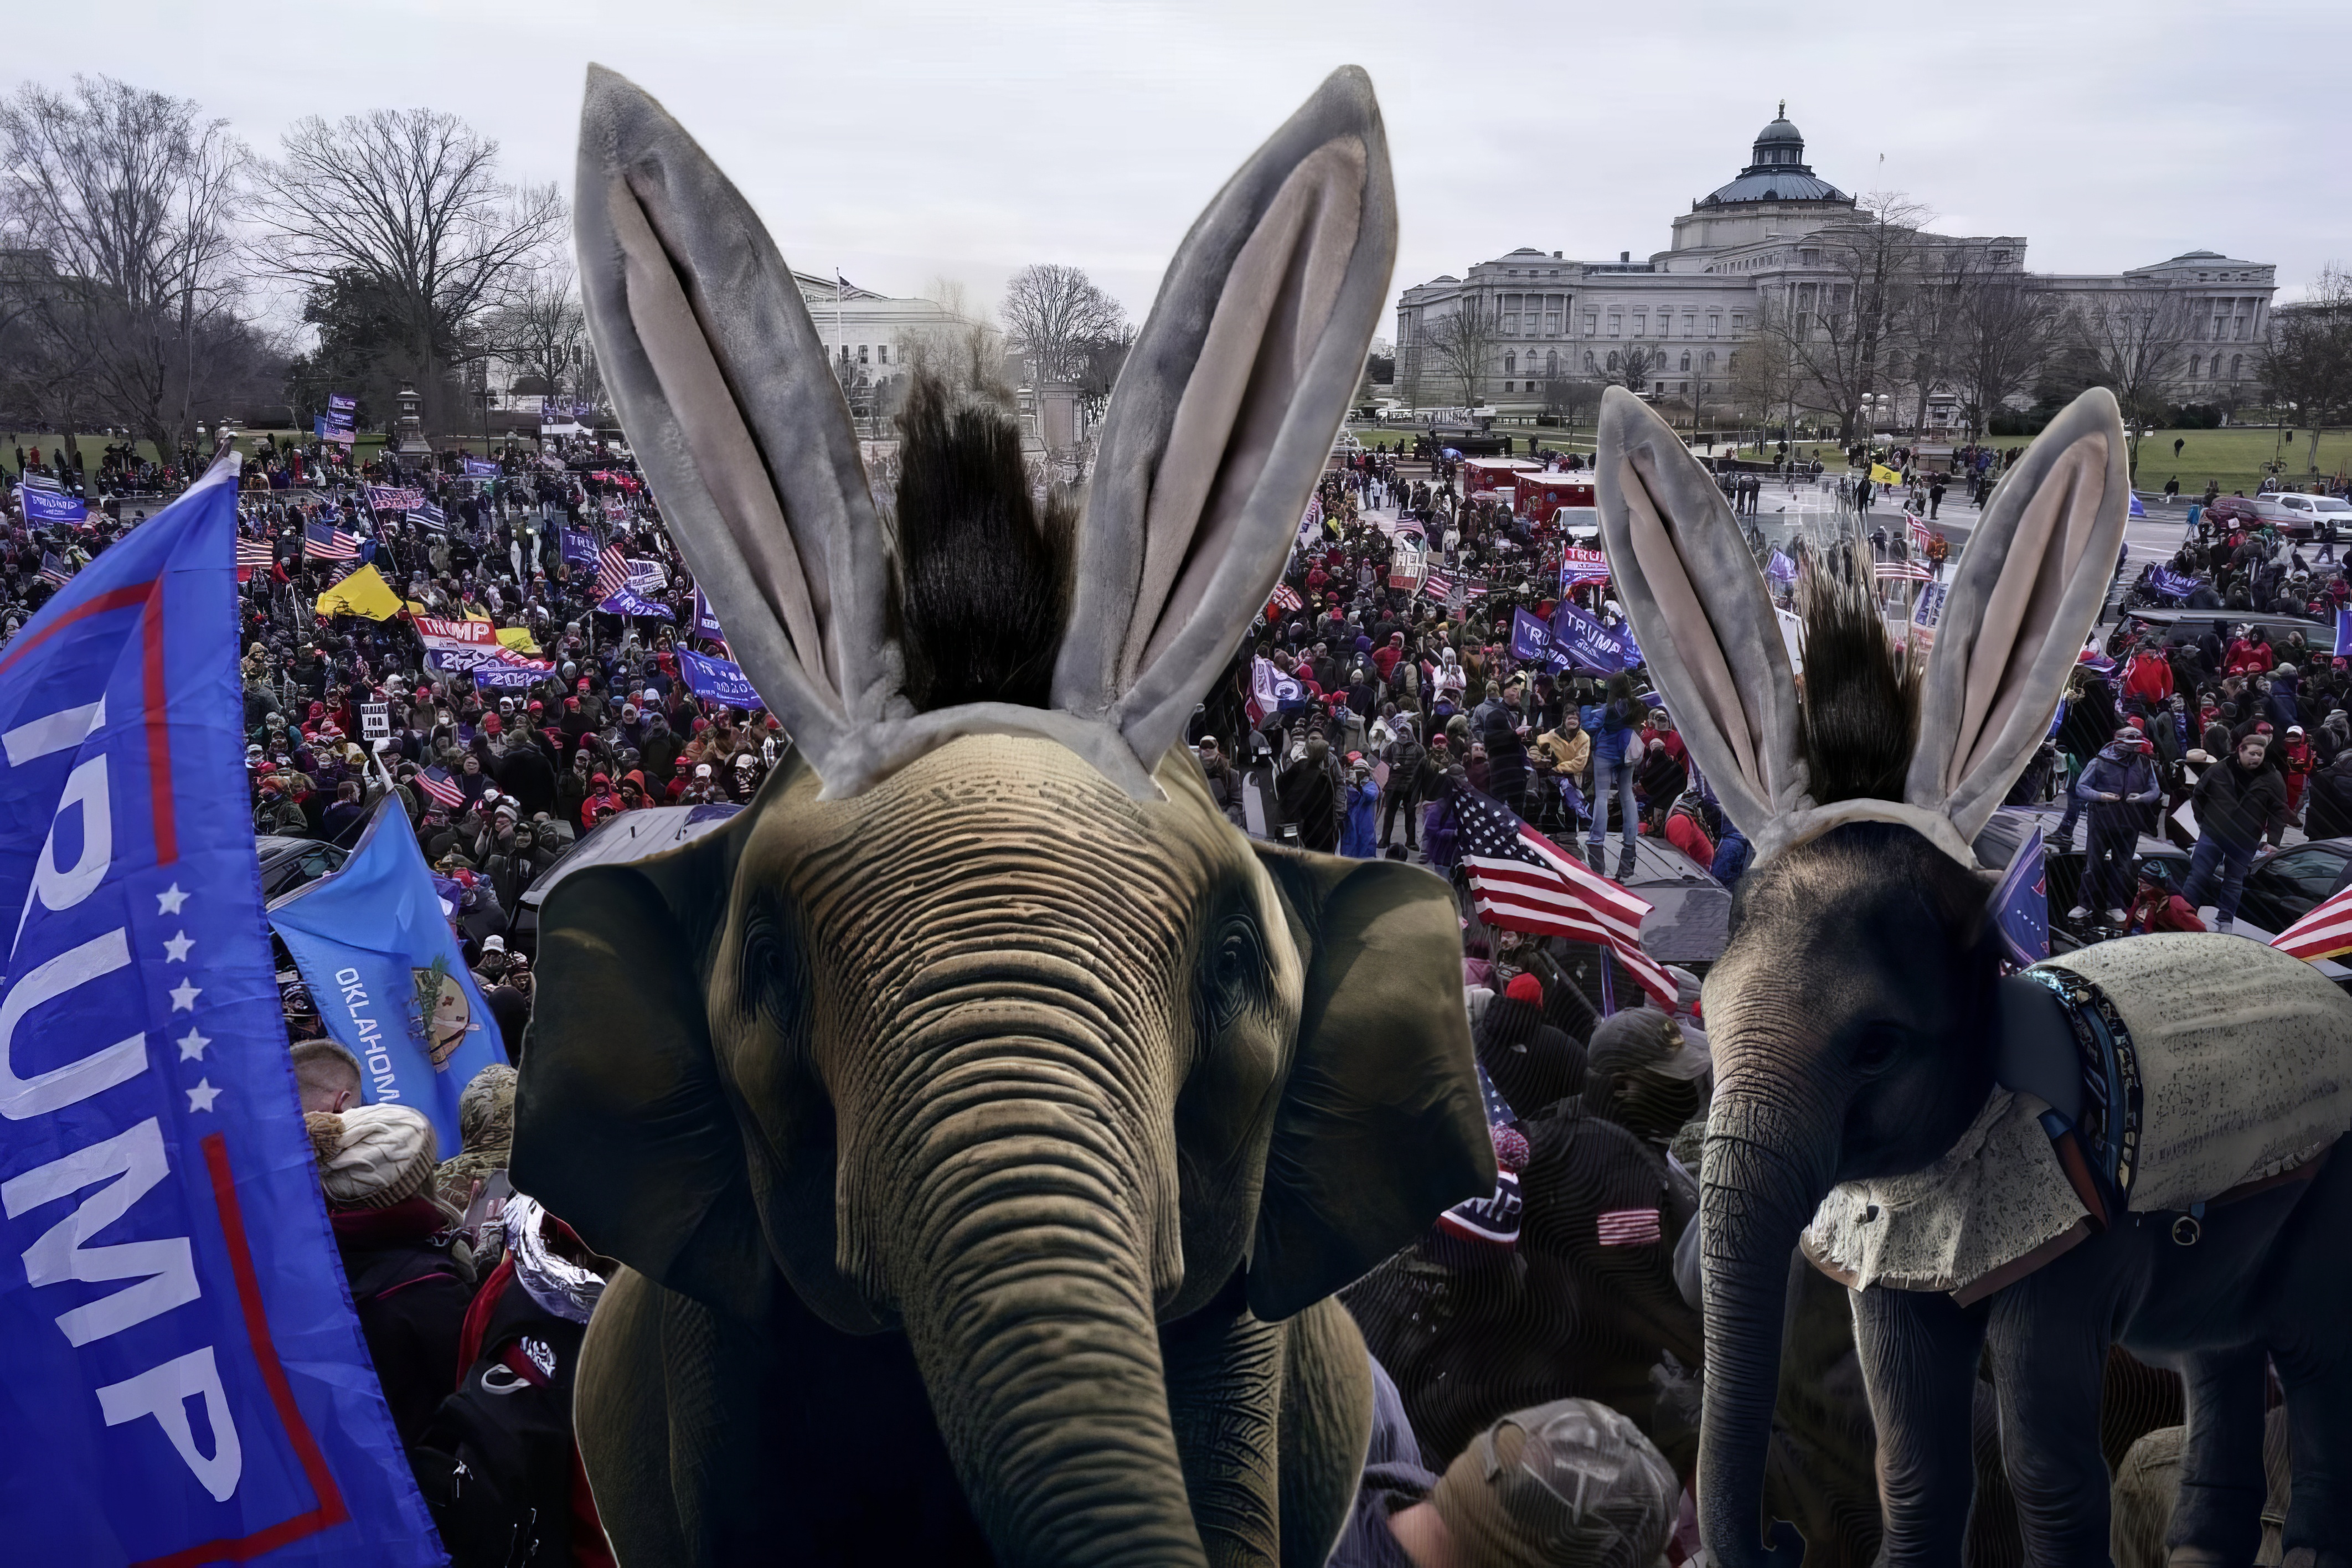 Two elephants with fake donkey ears at a Trump rally.